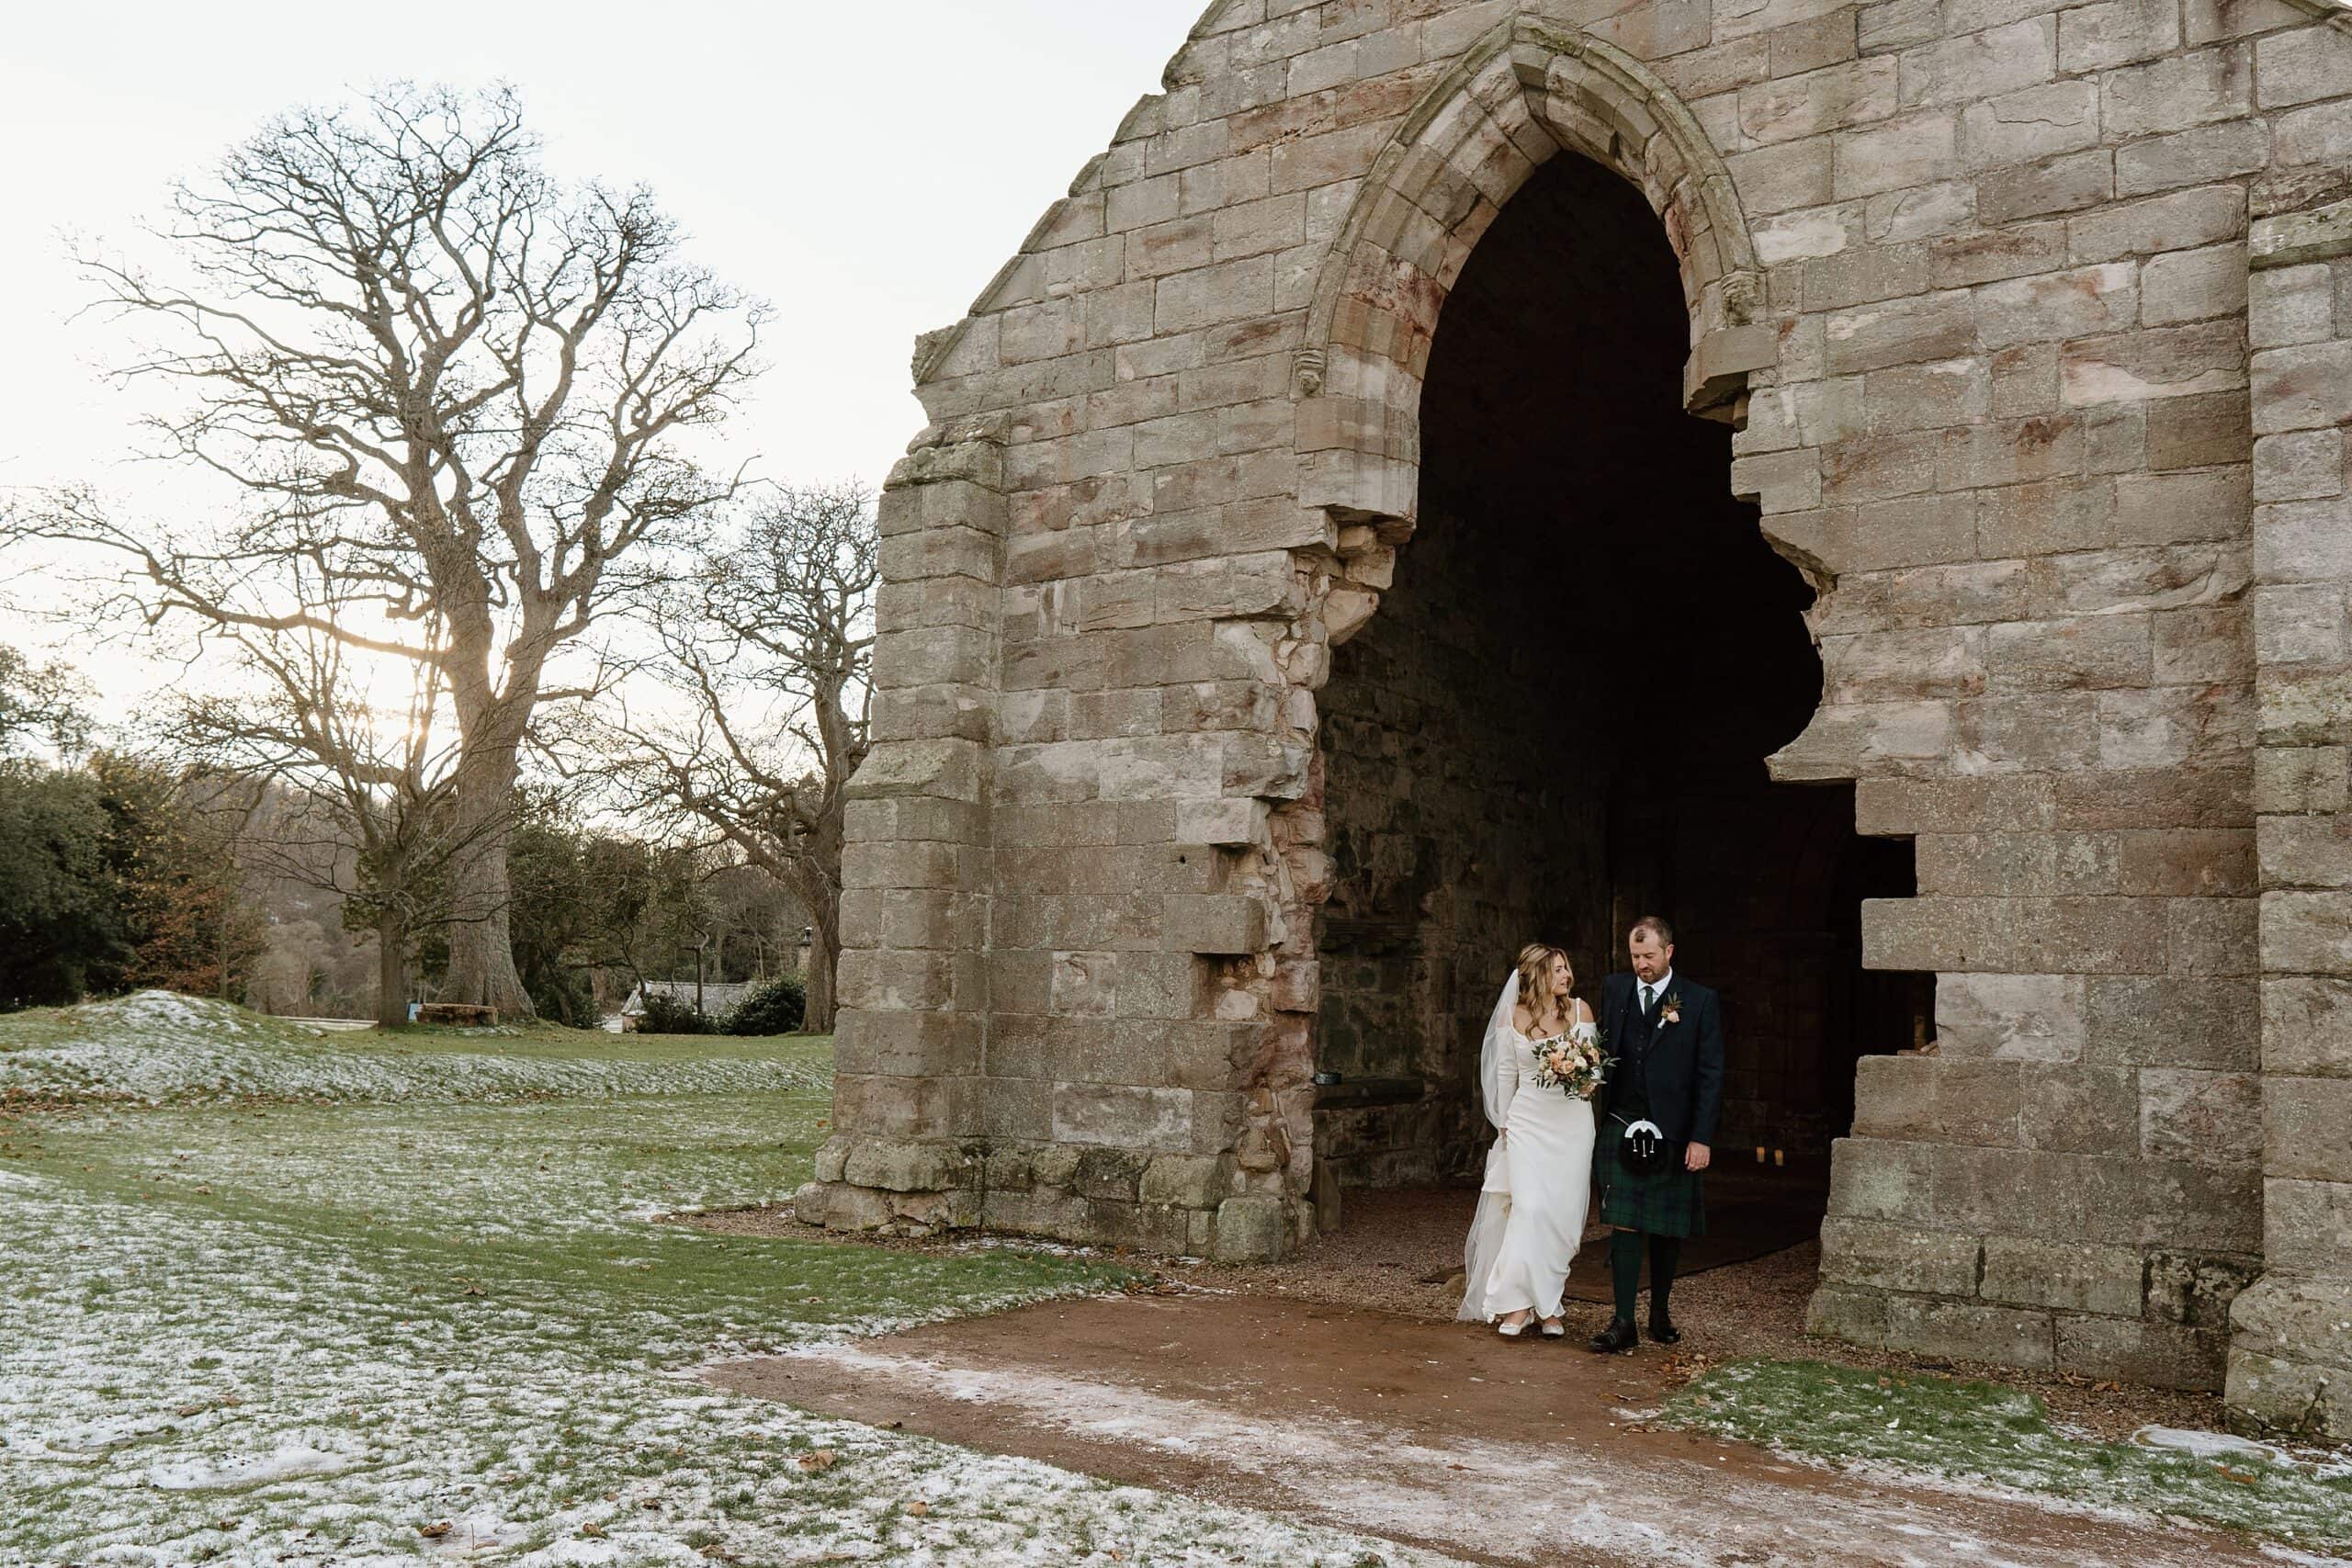 external outside view of dunglass estate wedding photos chapel church scotland on snowy winter day with bride and groom smiling at doorway